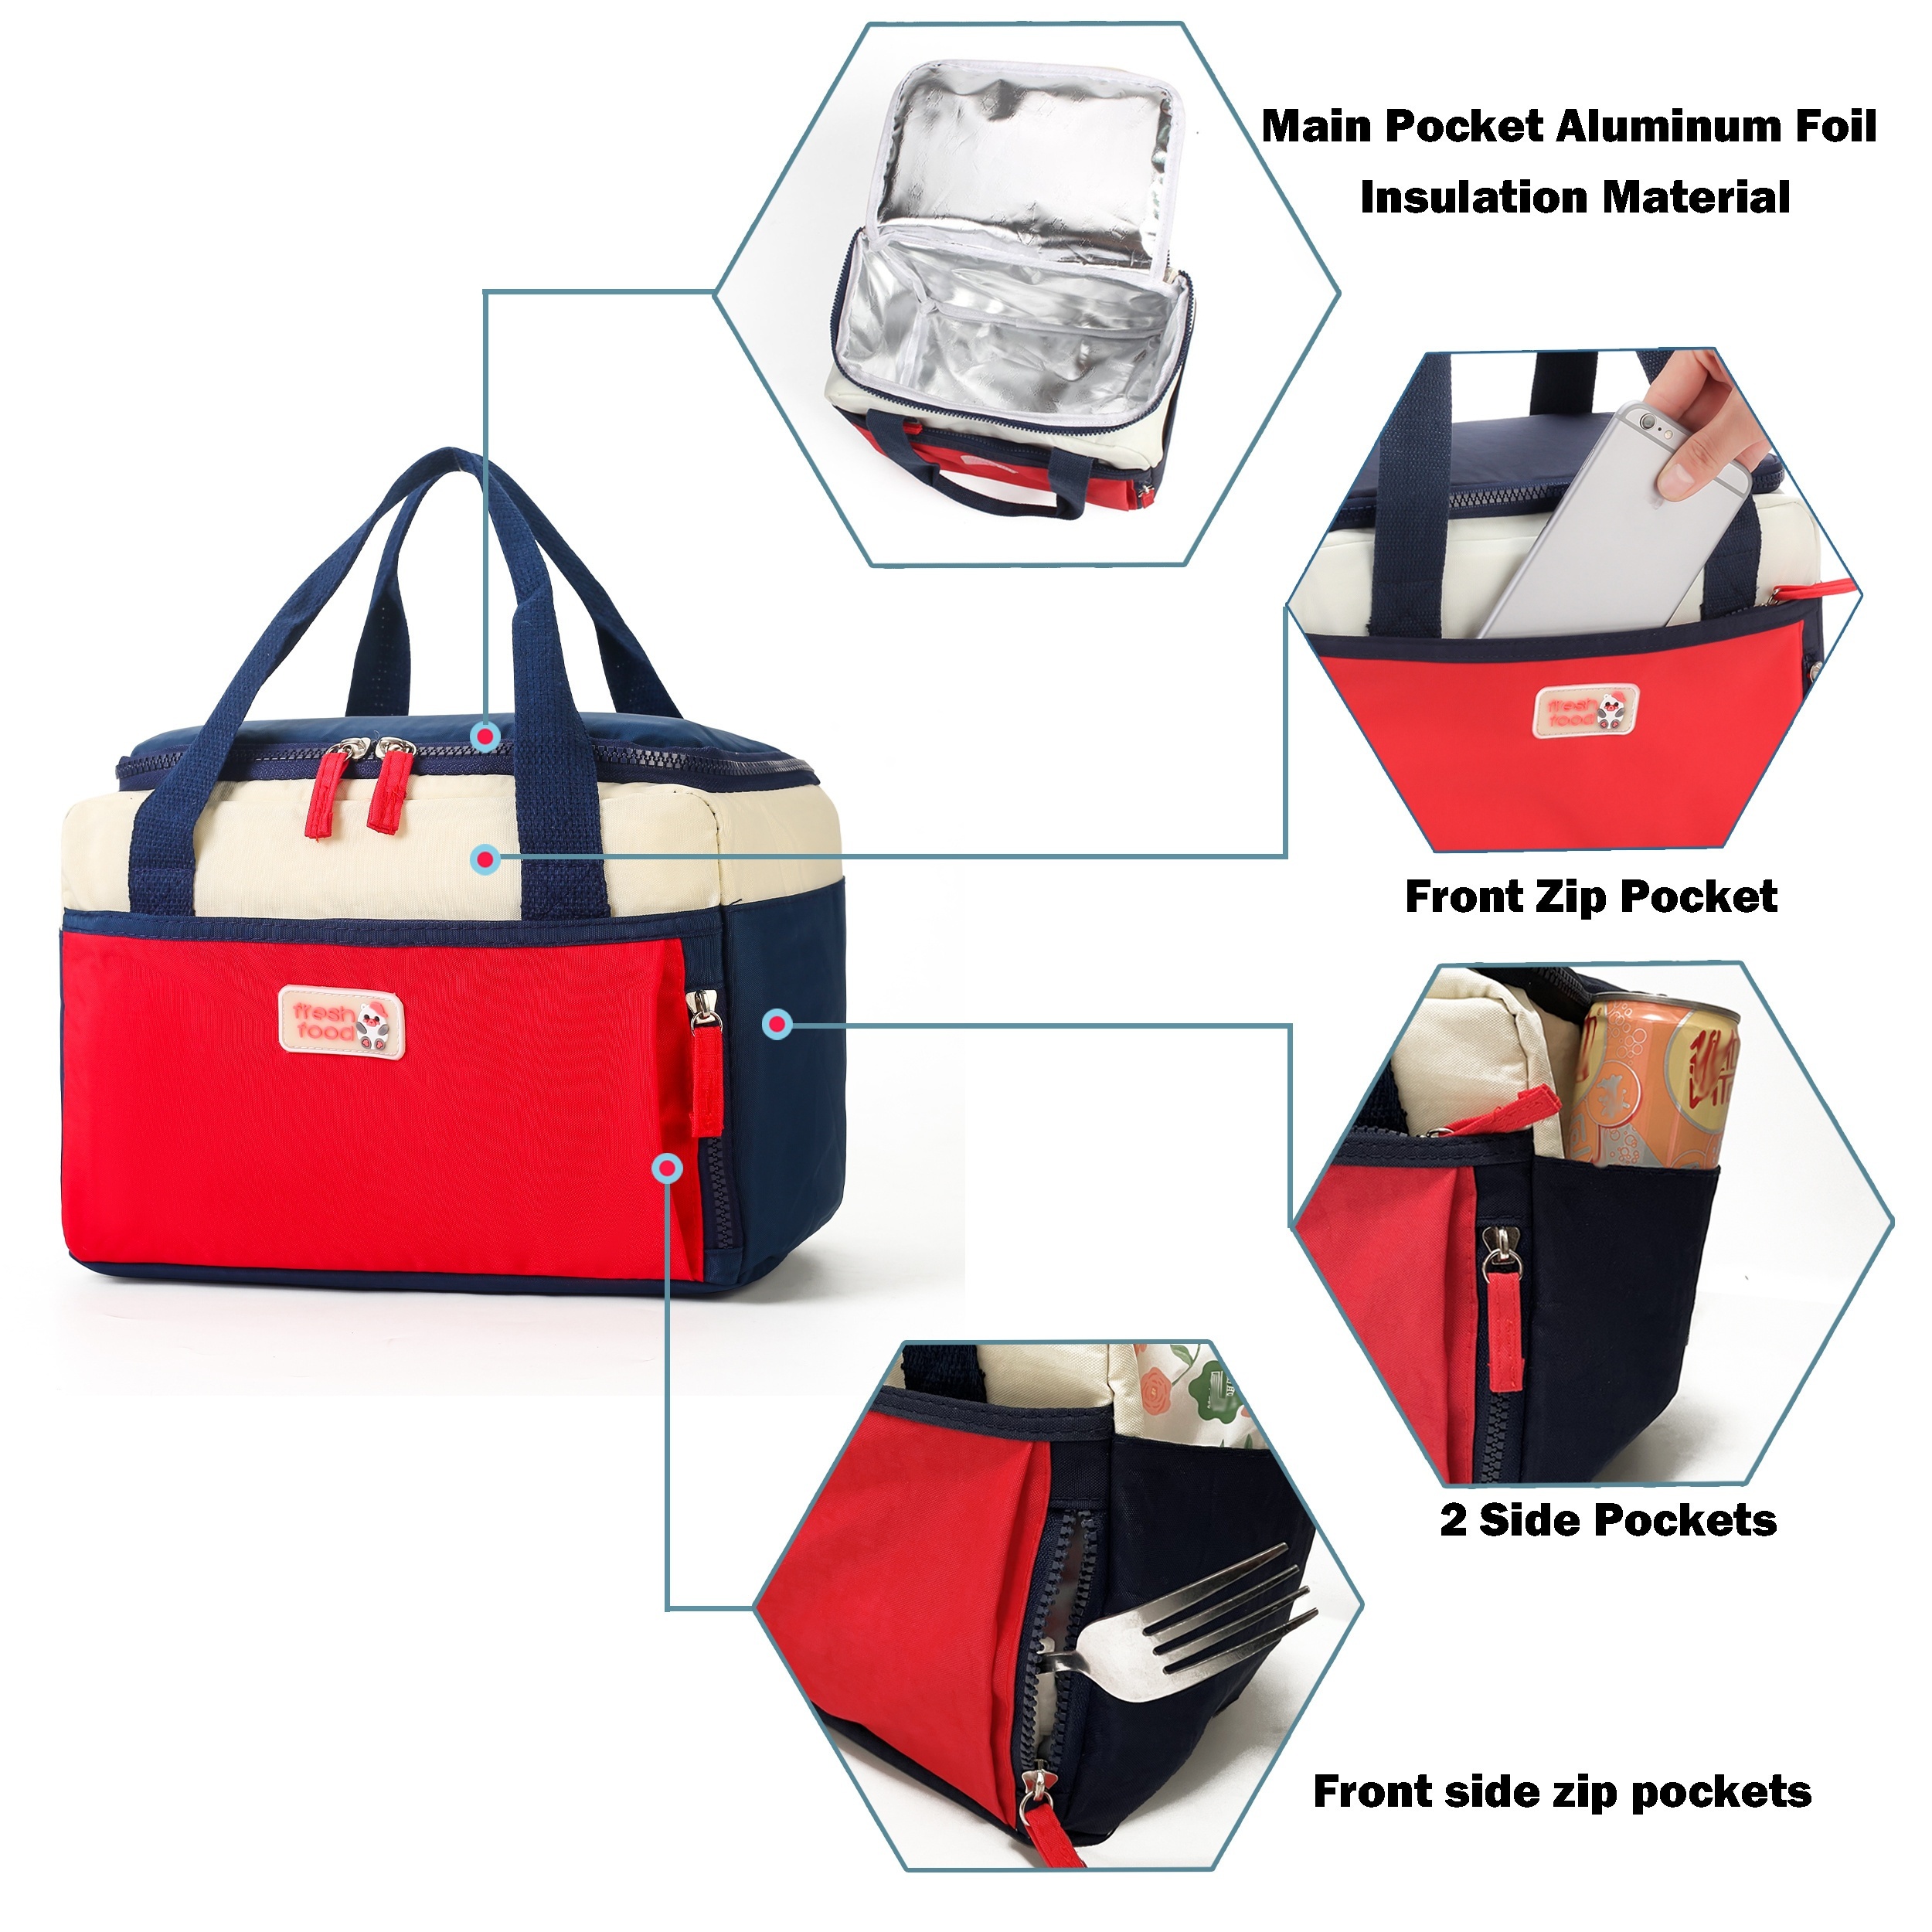 Insulated Lunch Box - Durable Insulated Lunch Bag Reusable Adults